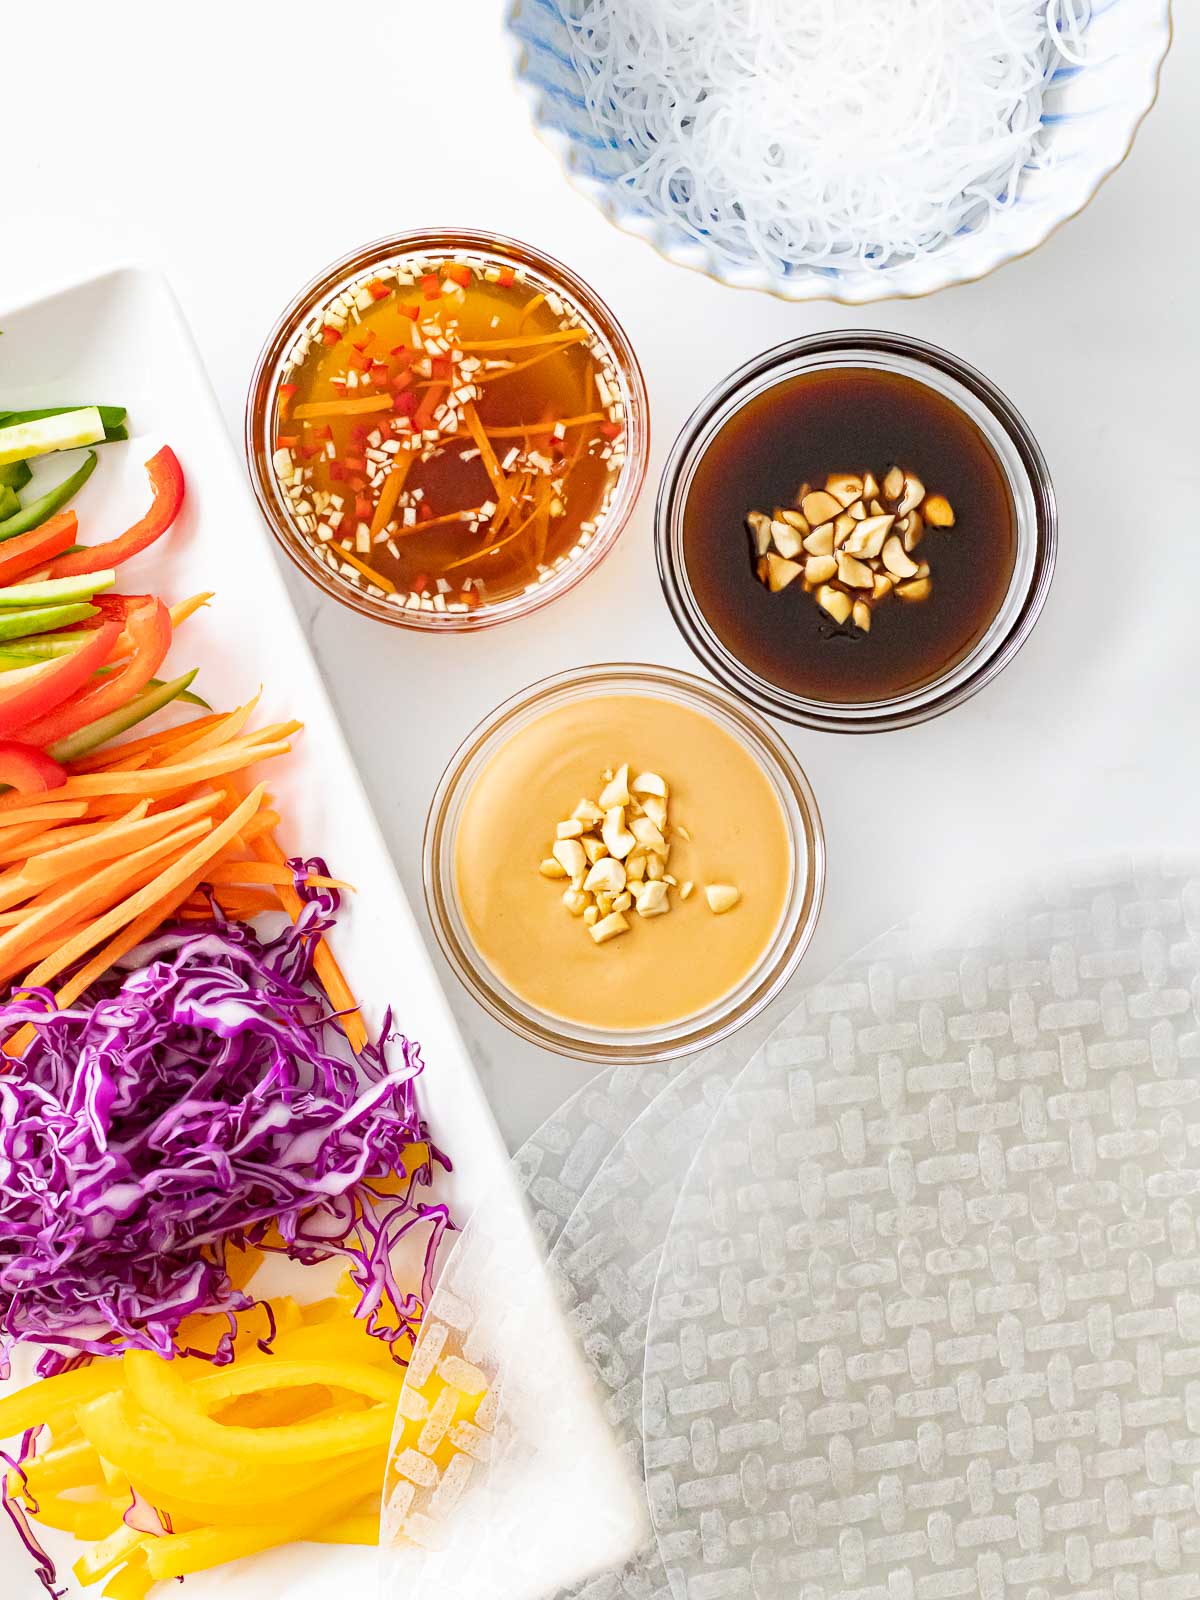 rainbow veggies with rice paper wrapper, dipping sauces, and vermicelli noodles